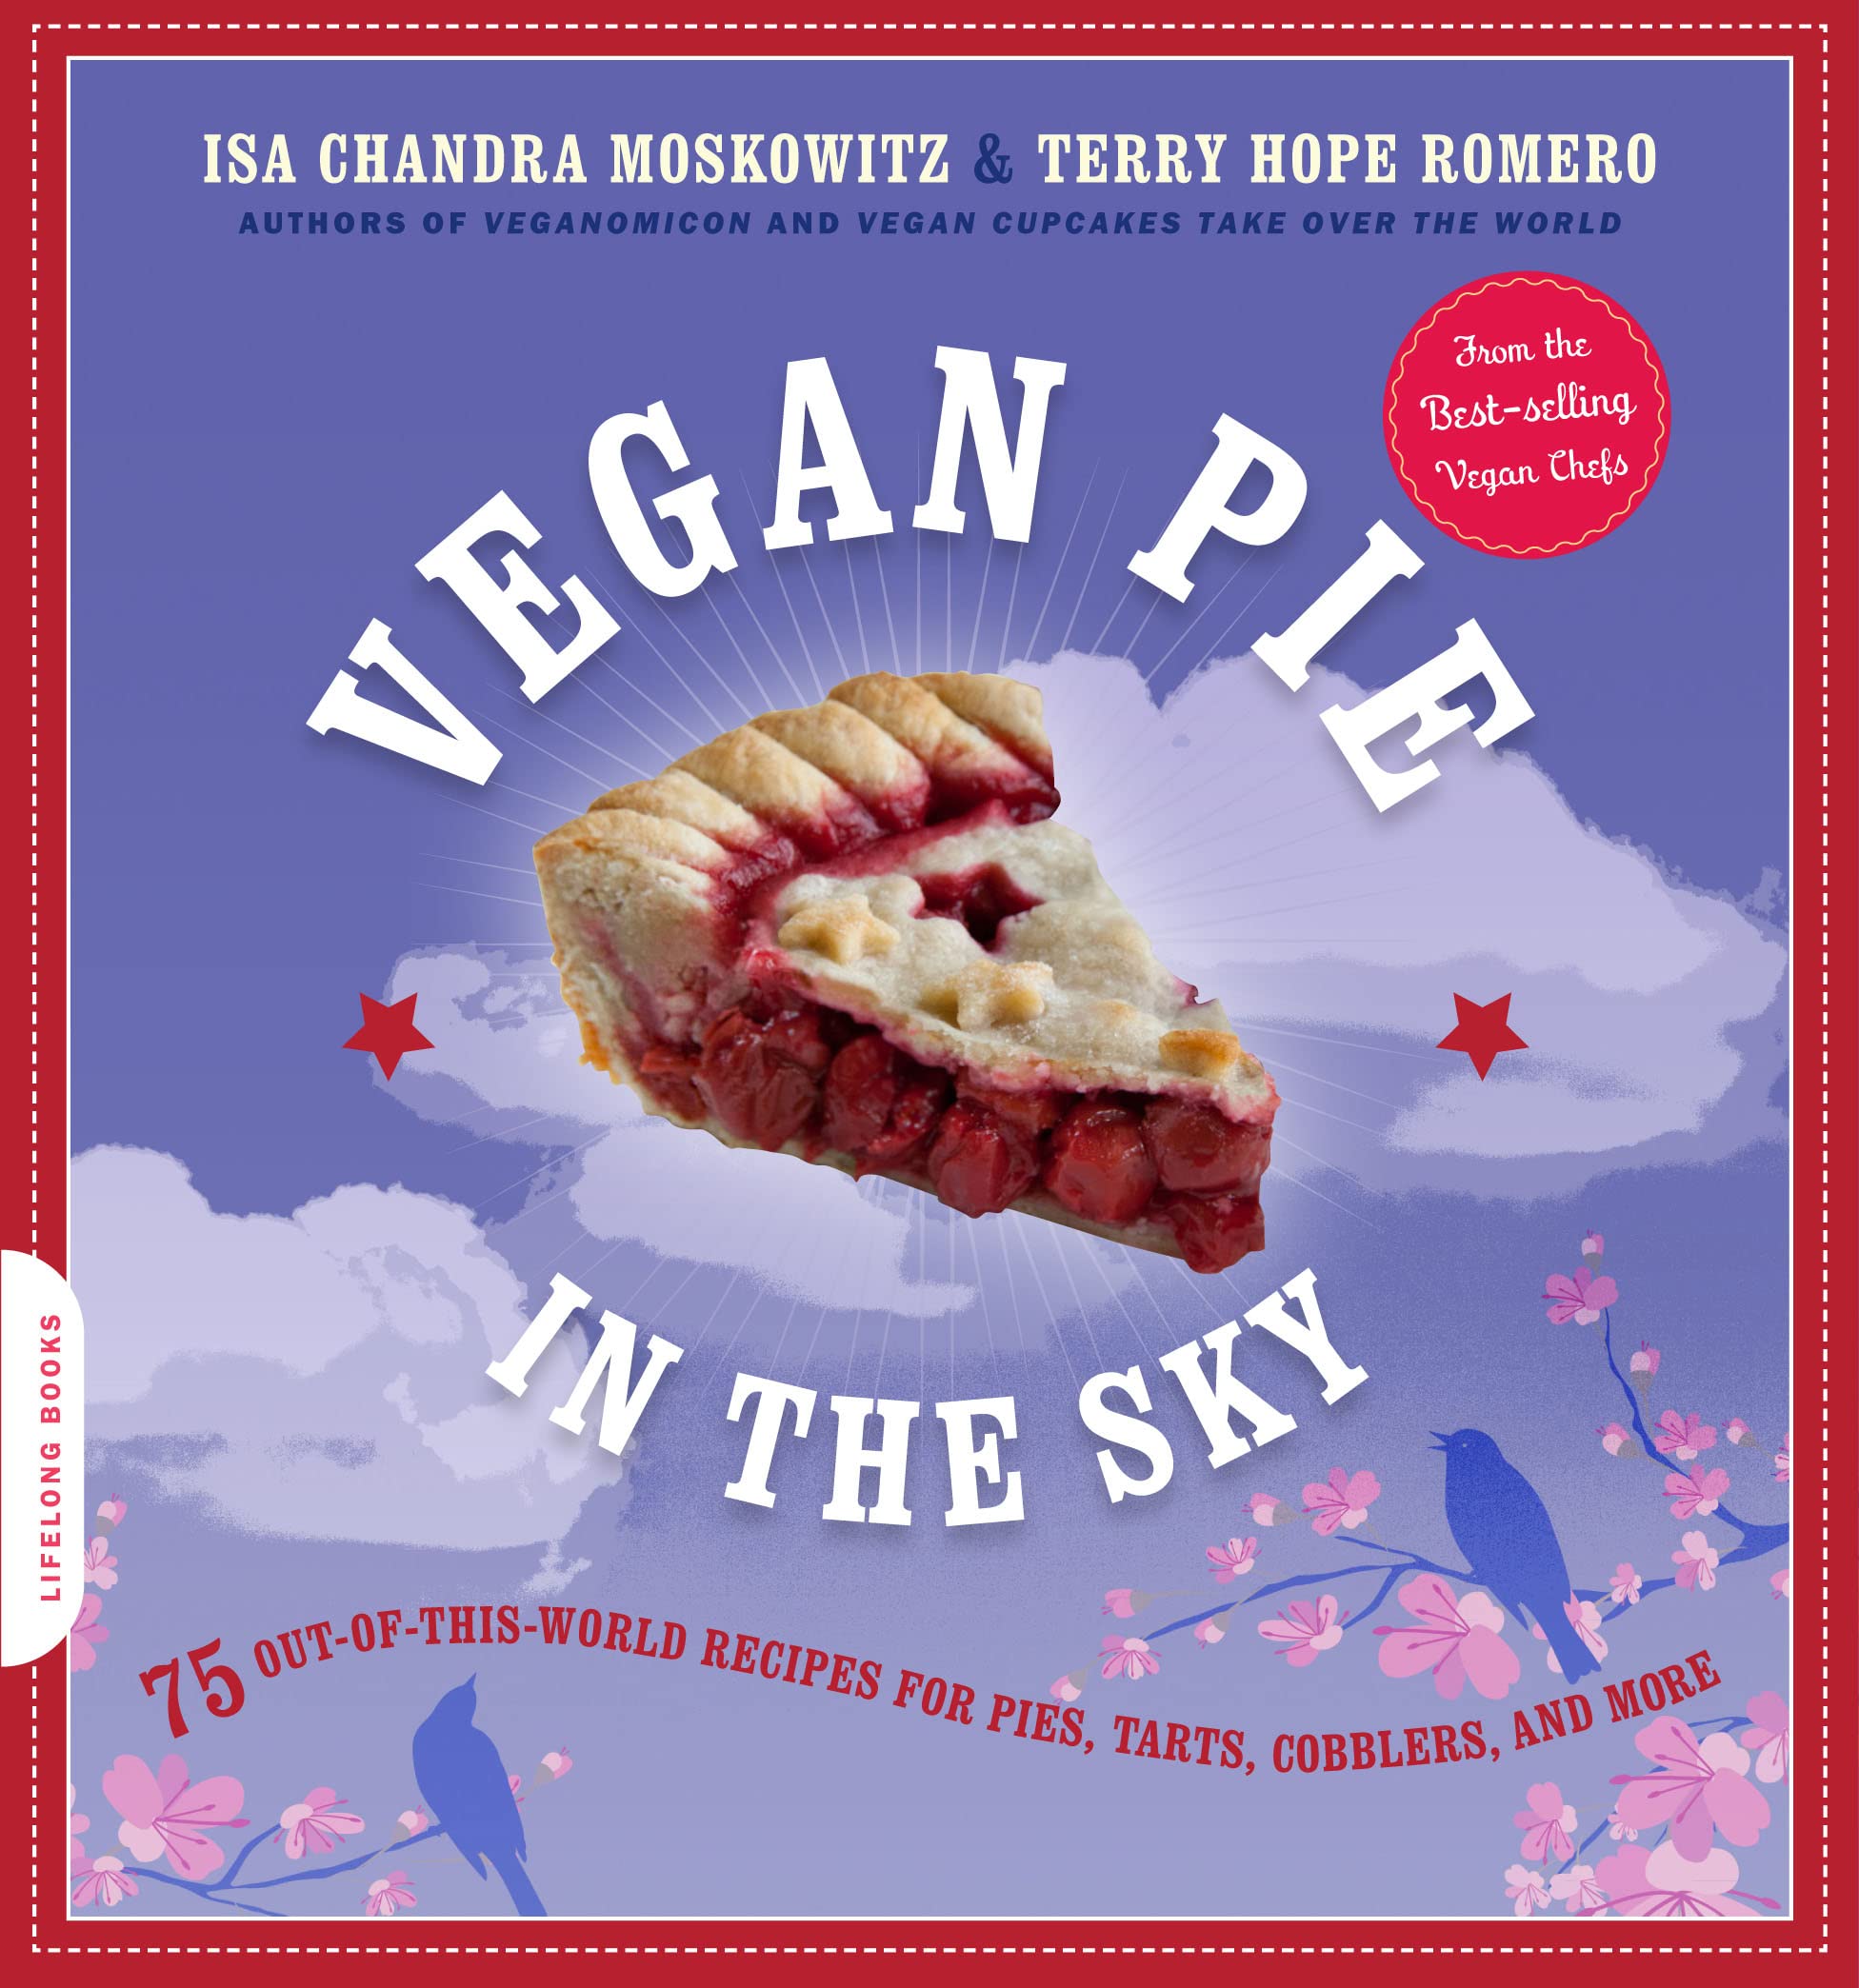 Vegan Pie in the Sky: 75 Out-of-This-World Recipes for Pies, Tarts, Cobblers, and More (Isa Chandra Moskowitz, Terry Hope Romero)